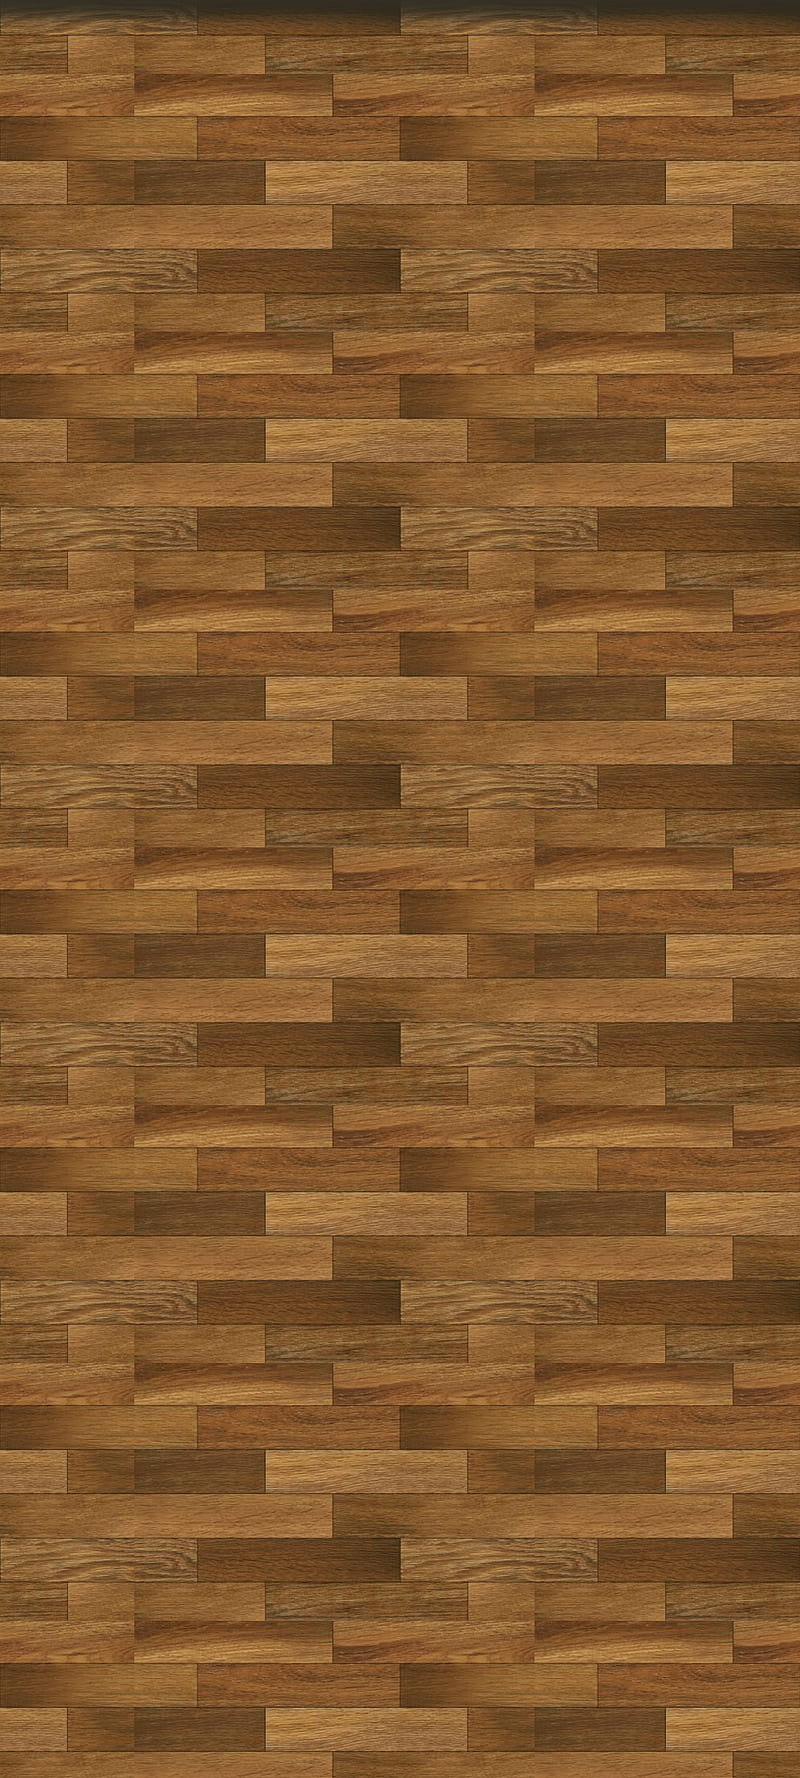 iPhone-WoodStyle21, iPhone, Galaxy, New, Art, pattern, Cool, lockscreen, handy, Modern, Surface, , design, Smooth, wood, A51, Background, Galaxy S21, Druffix, 2021, brown, M32, Magma, Android, Acer, Apple, Colors, S10, wooden, style, LG, Samsung, Edge, Nokia, Original, HD phone wallpaper